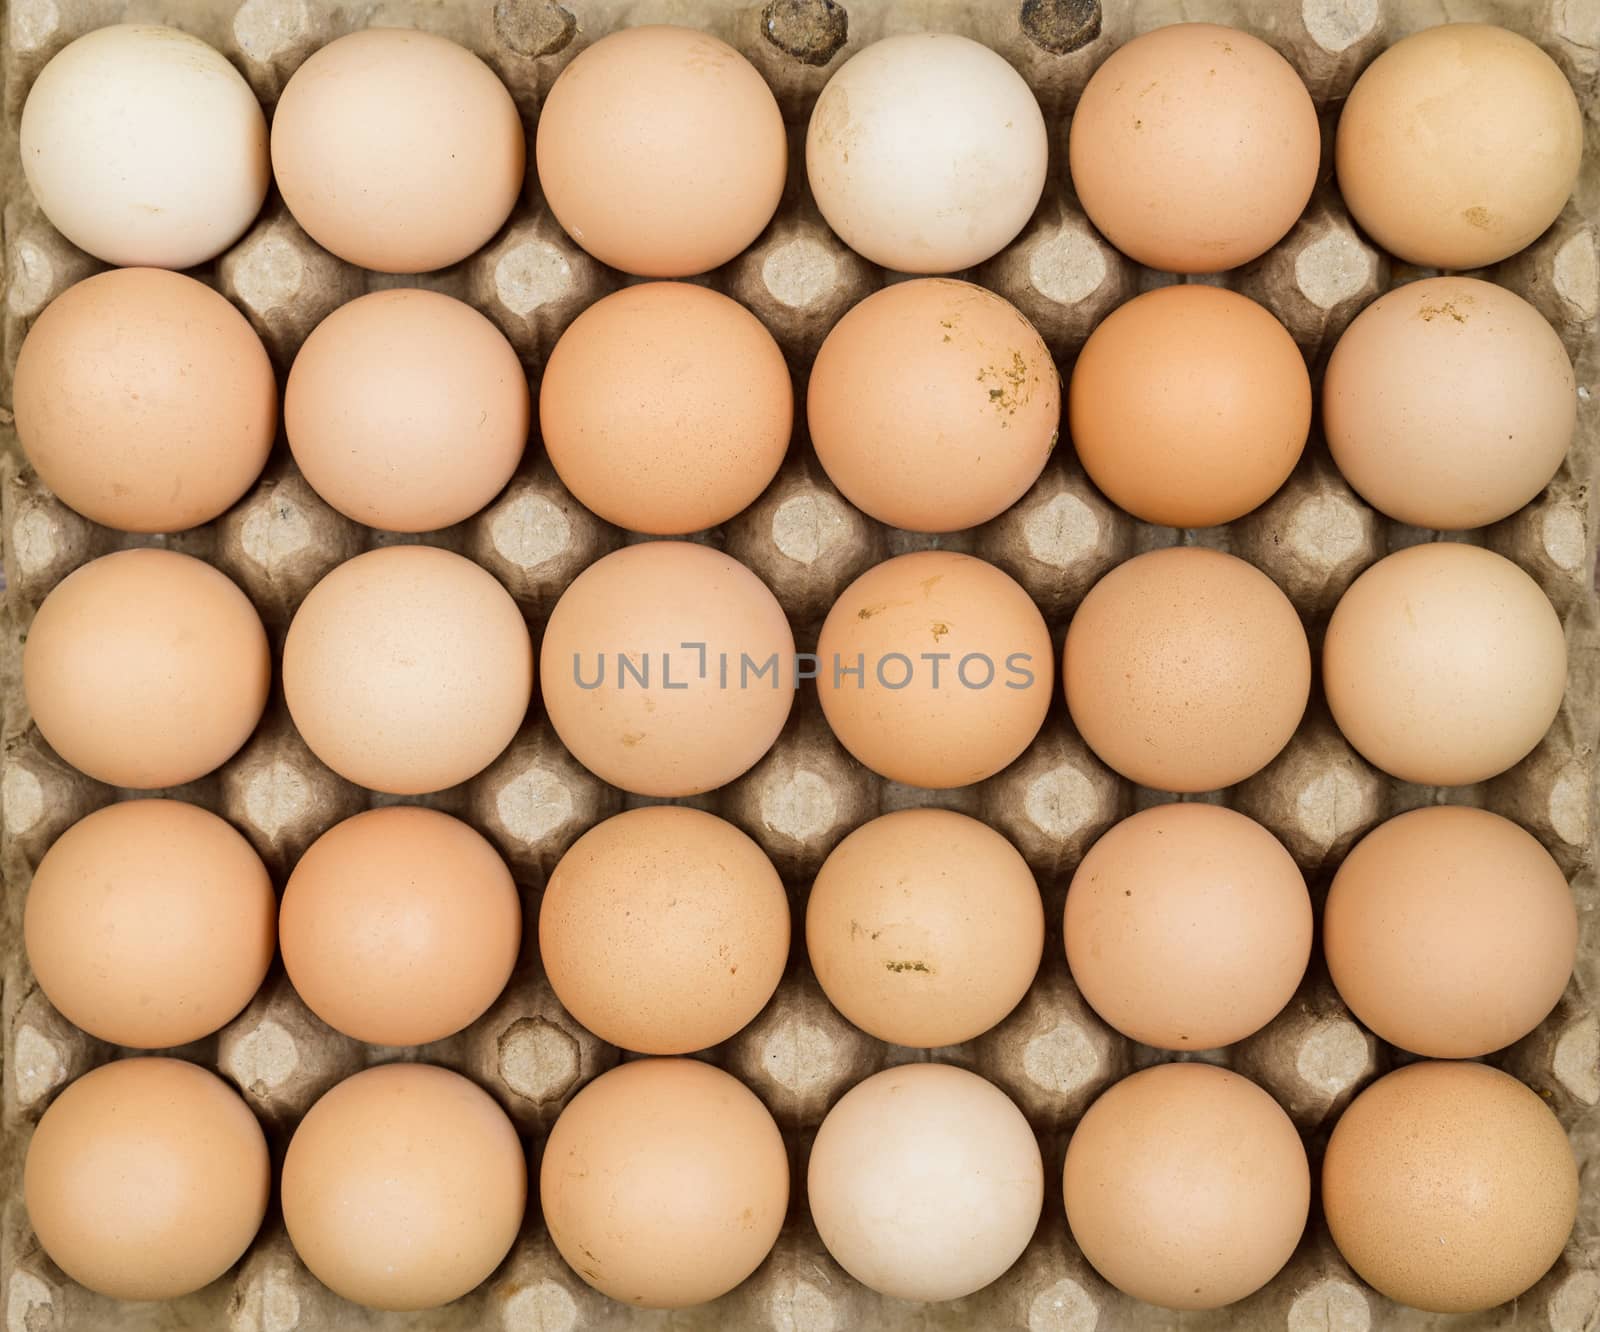 Overhead view of free range organic chicken eggs in tray. Some eggs are dirty.